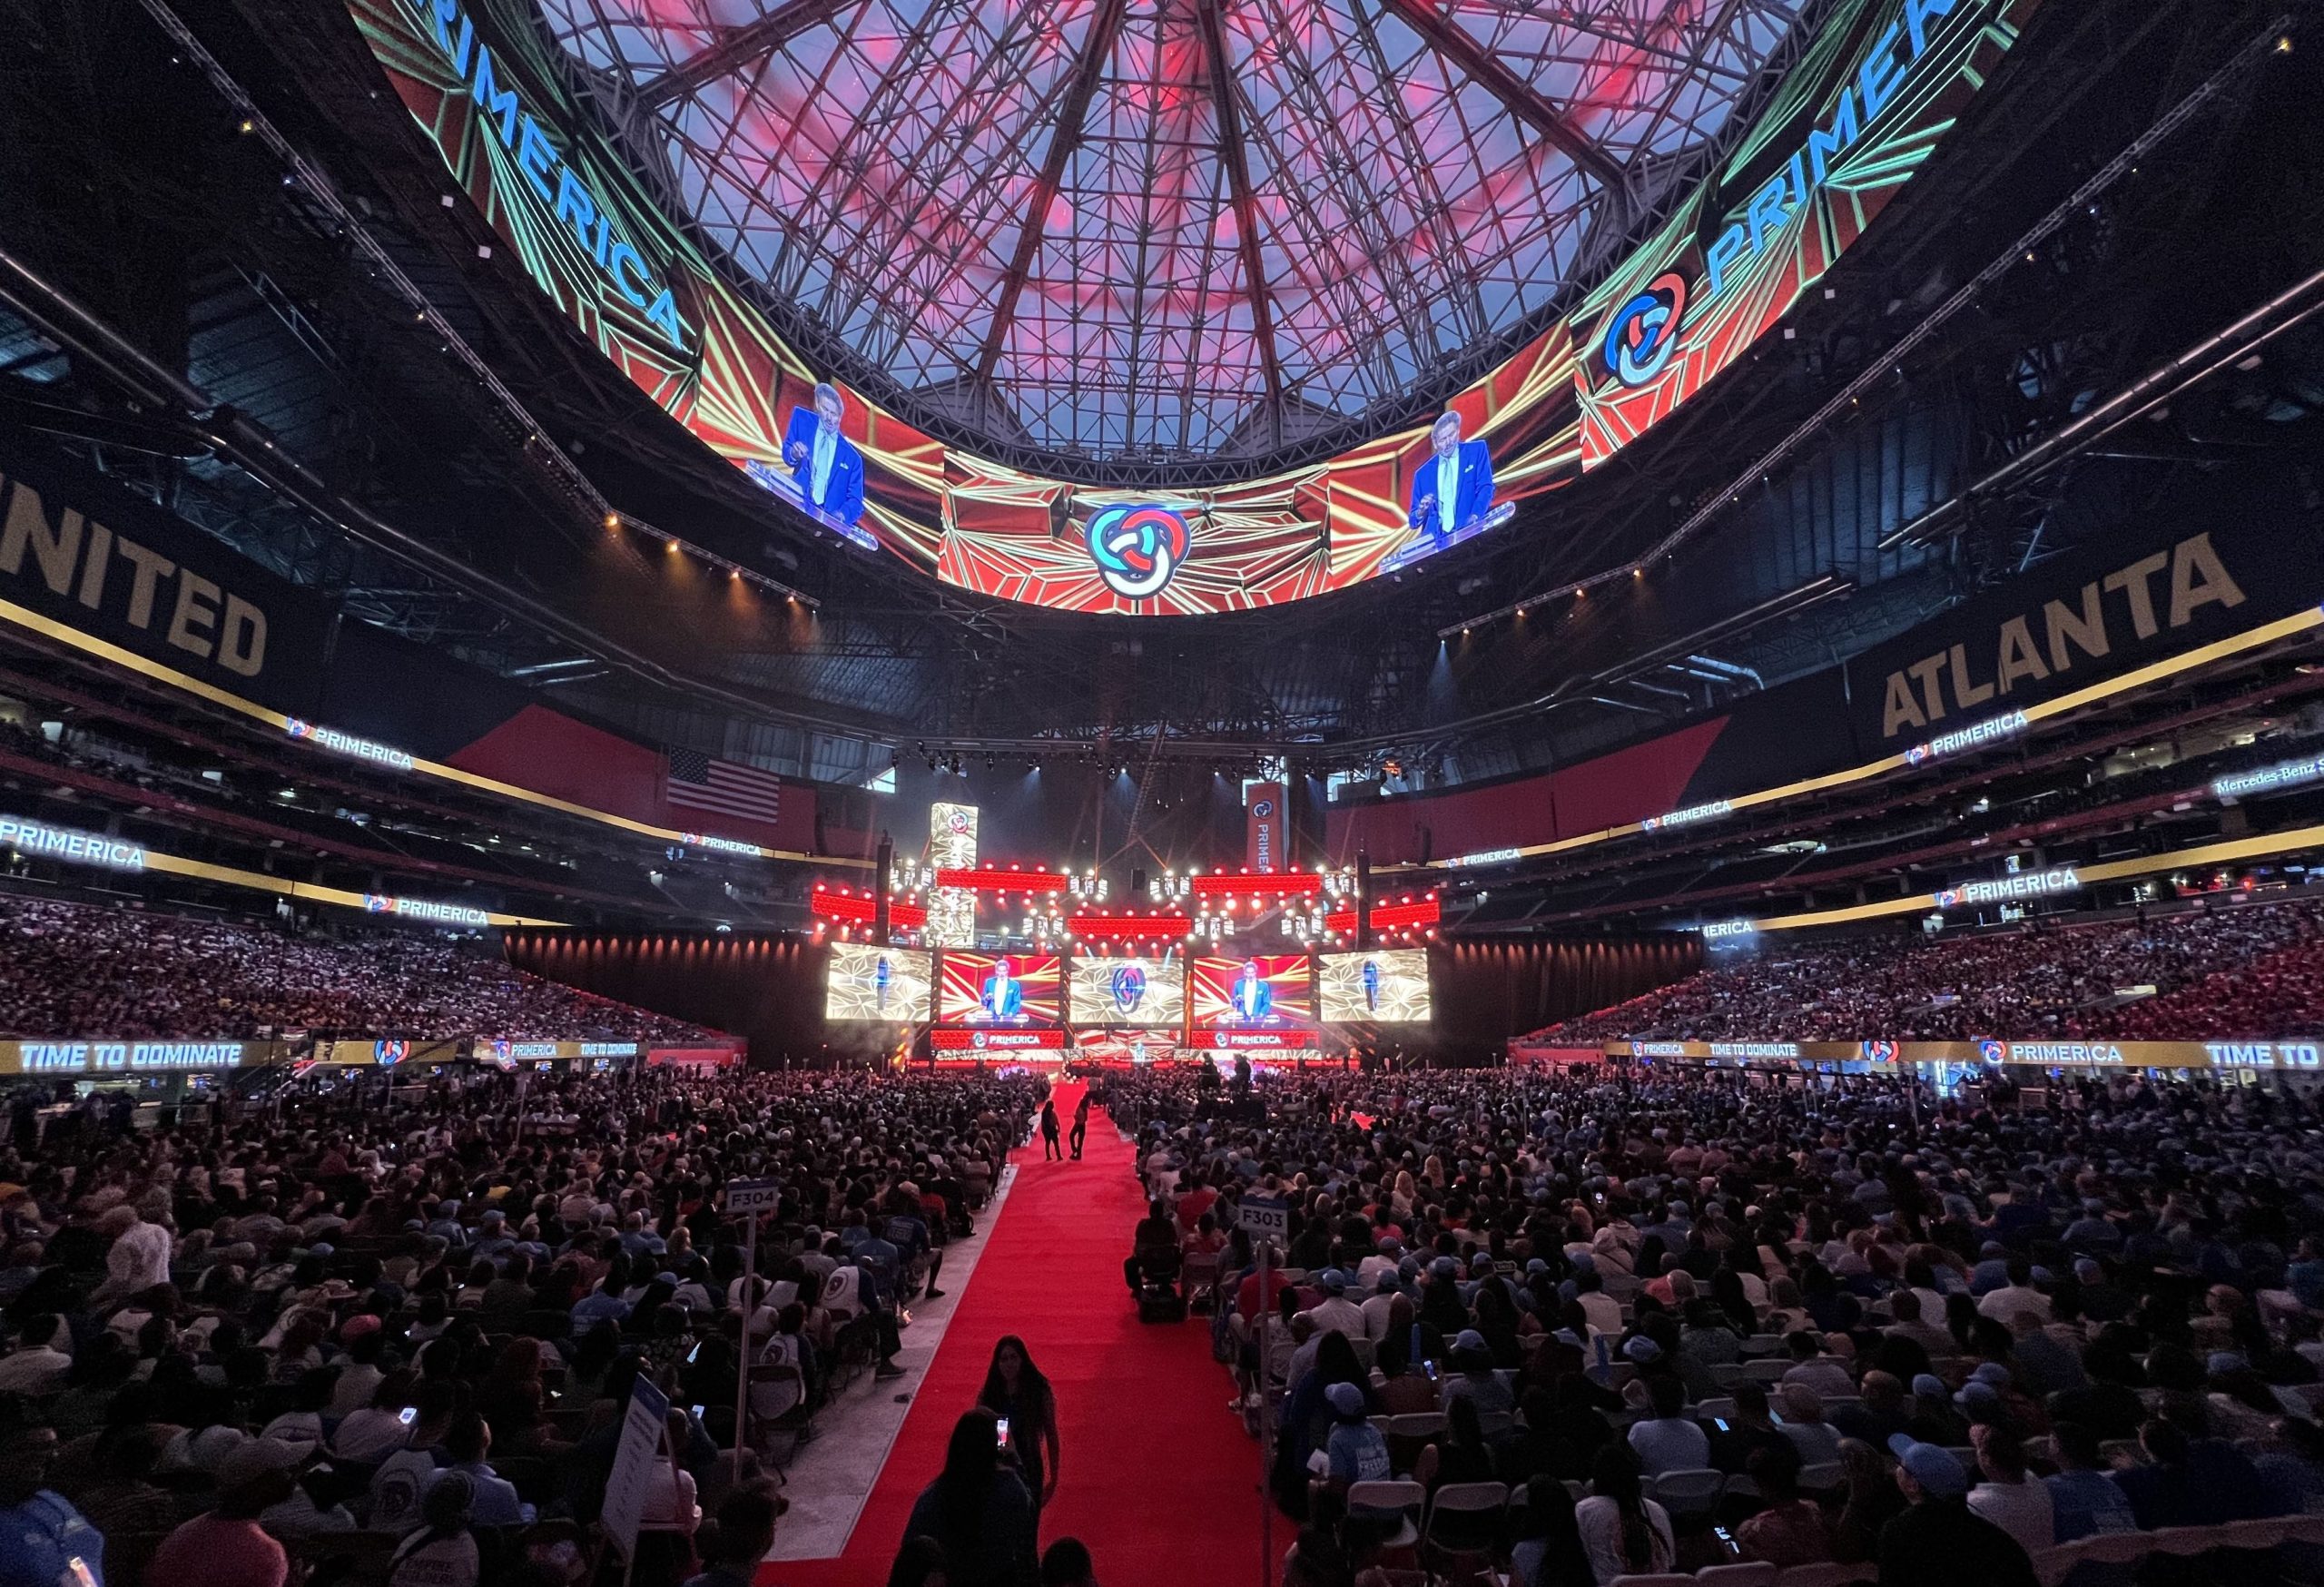 The stage at the Mercedes-Benz stadium during the Primerica International Convention with the word “Primerica” shown across multiple TV screens.